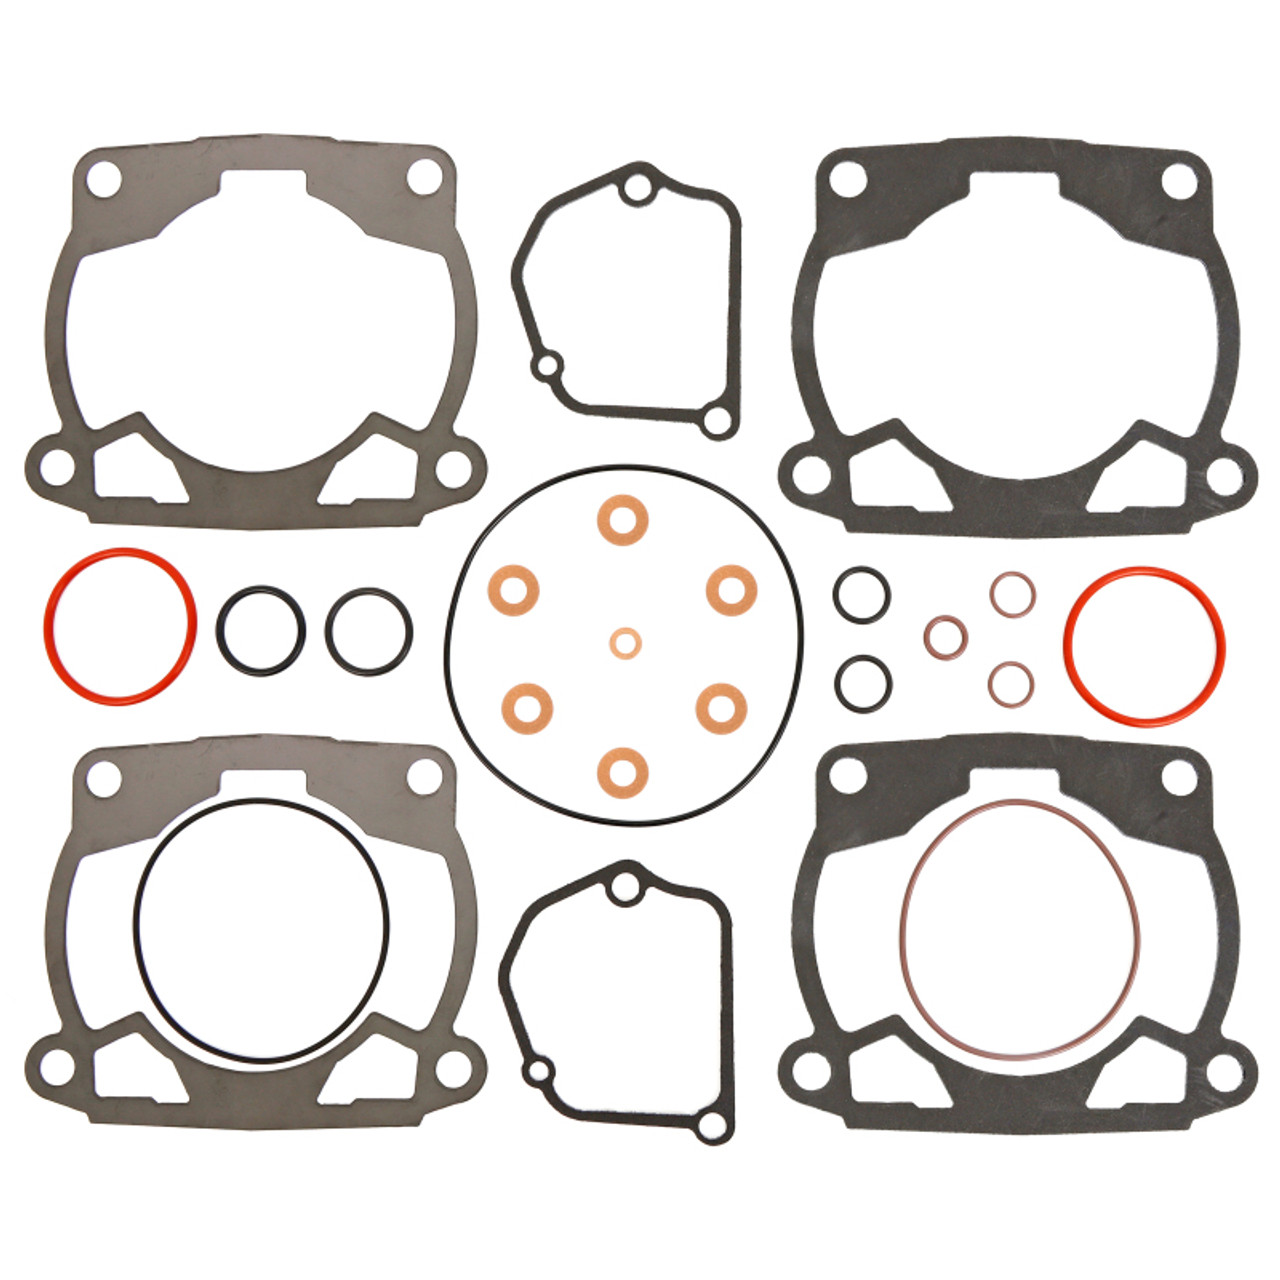 Cometic 2023 250 SX Top End Gasket Kit - C3811 Photo - Primary